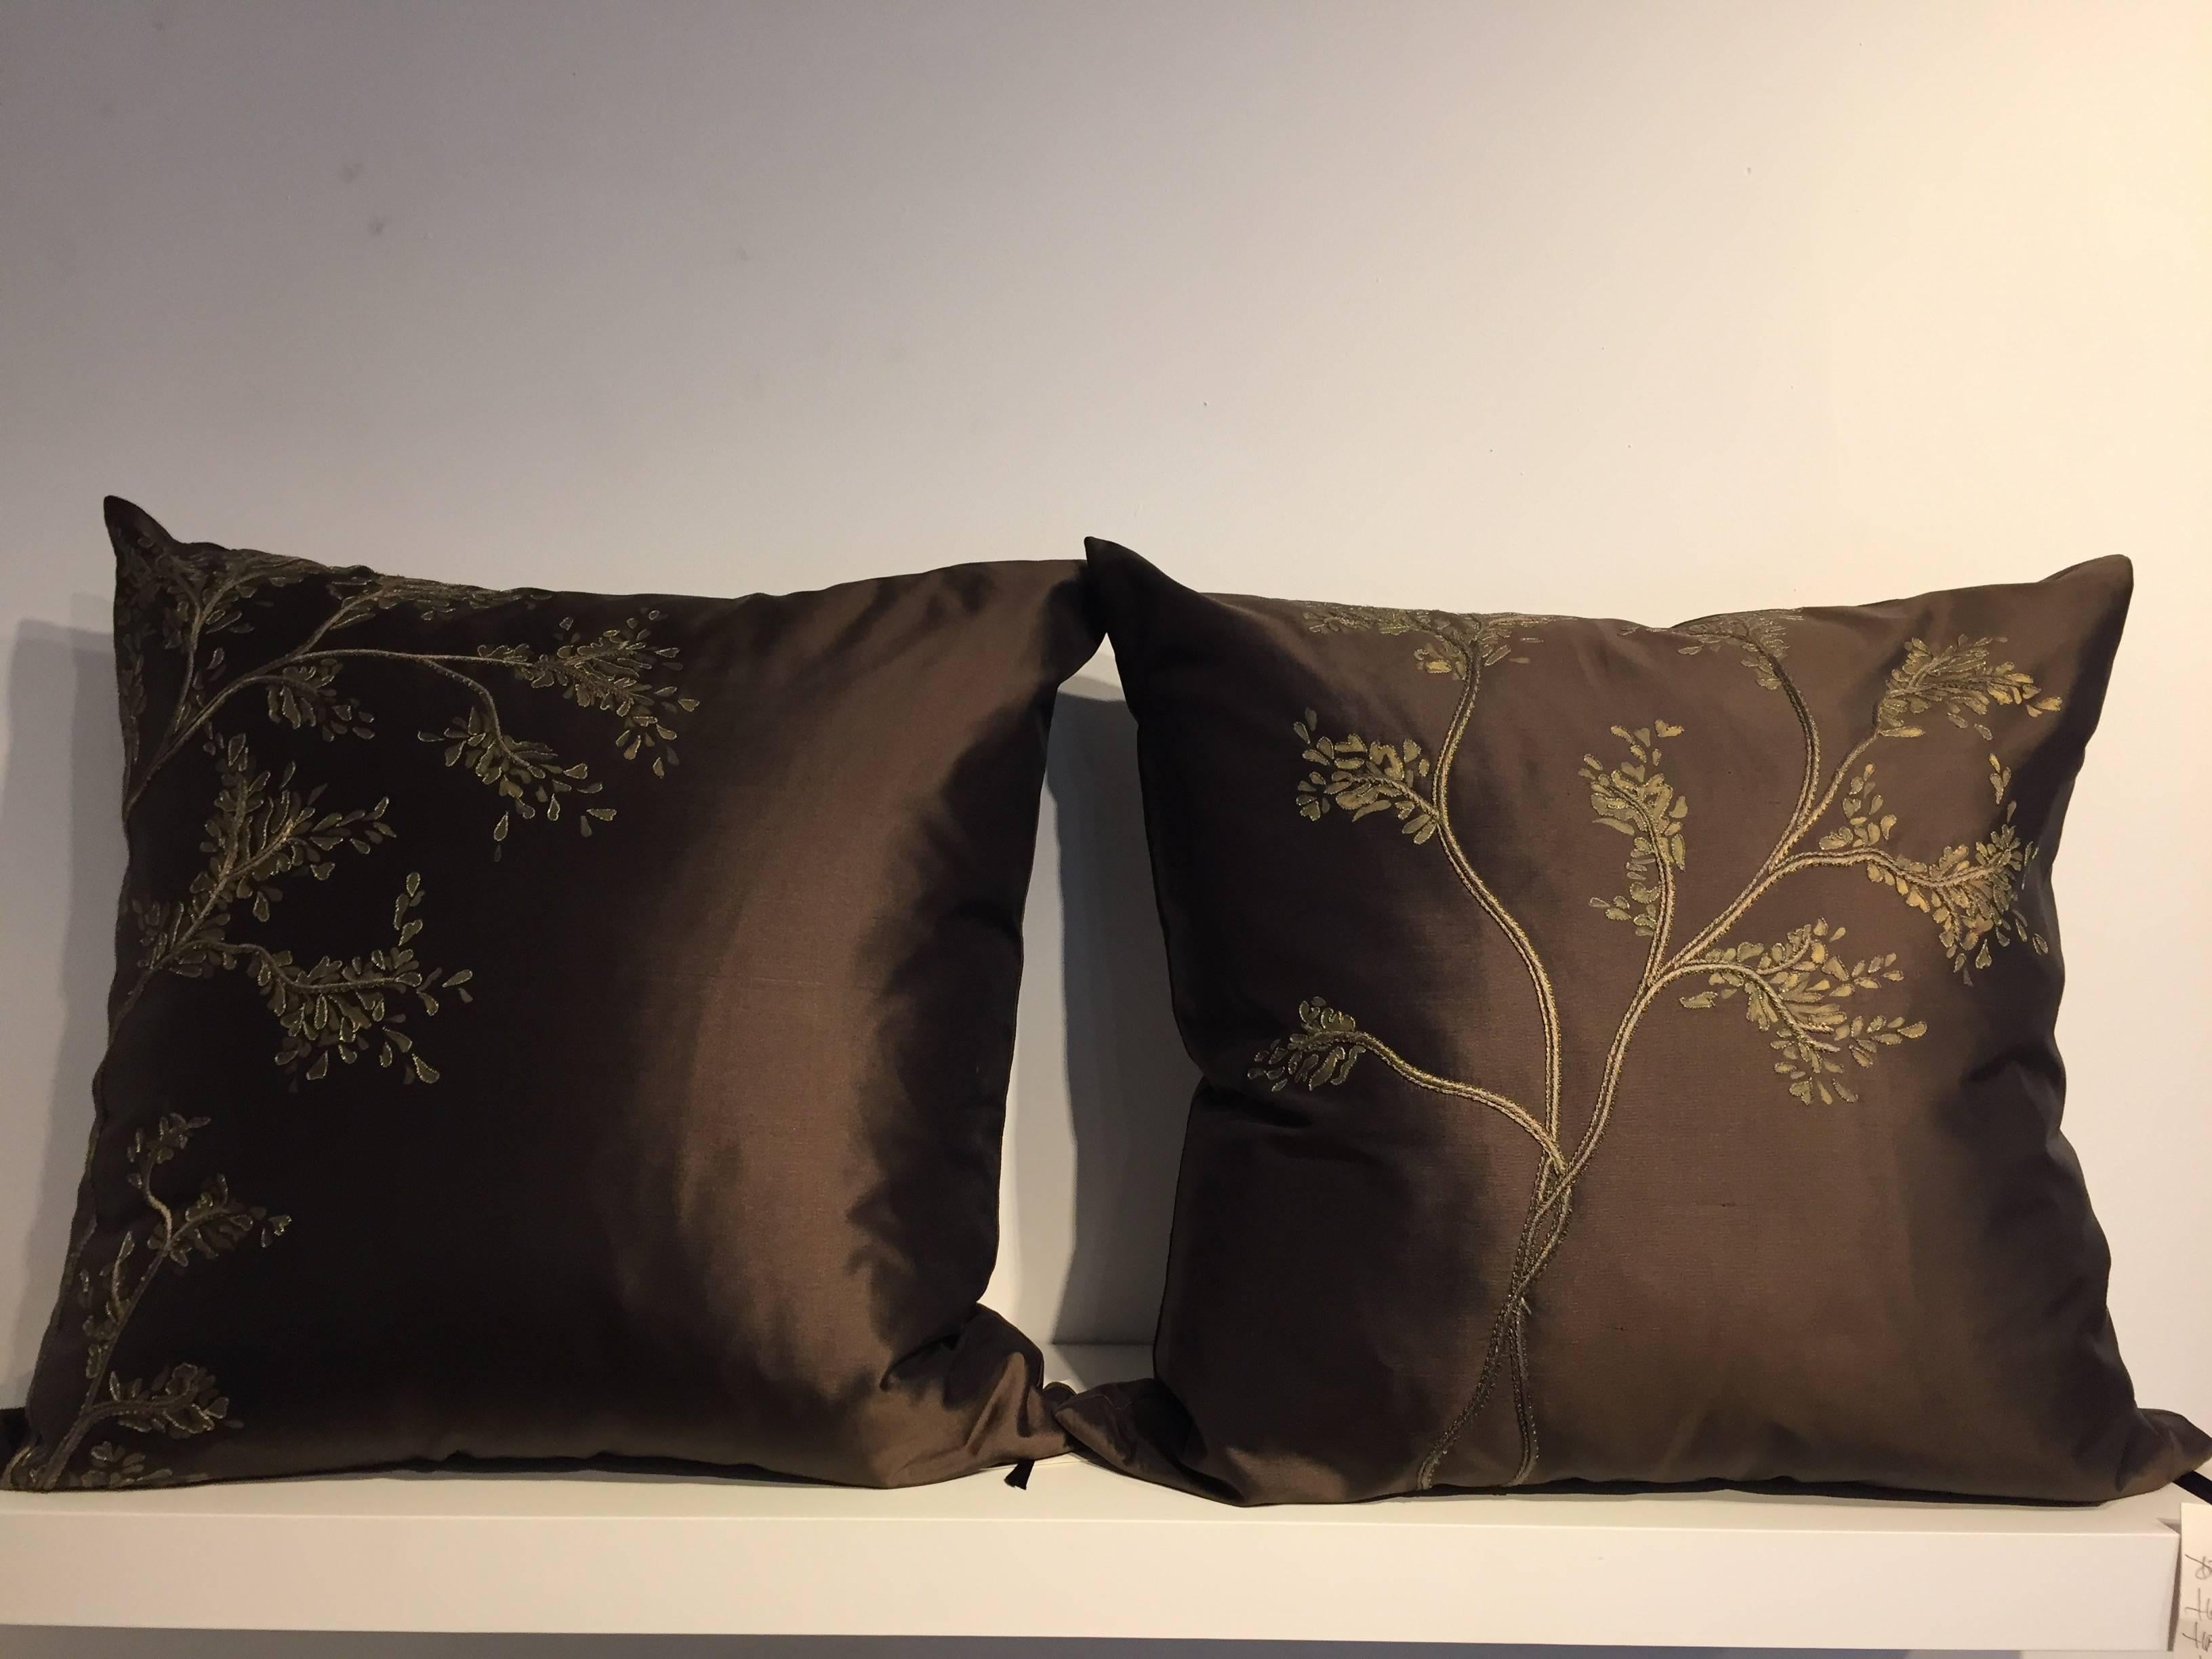 One pair of decorative cushions with hand embroidery and hand painting in the style of Emperor's garden, silk taffeta Chase Erwin Diva col. chocolate, embellished with hand embroidery in silk thread color brown, metal thread and hand painting in